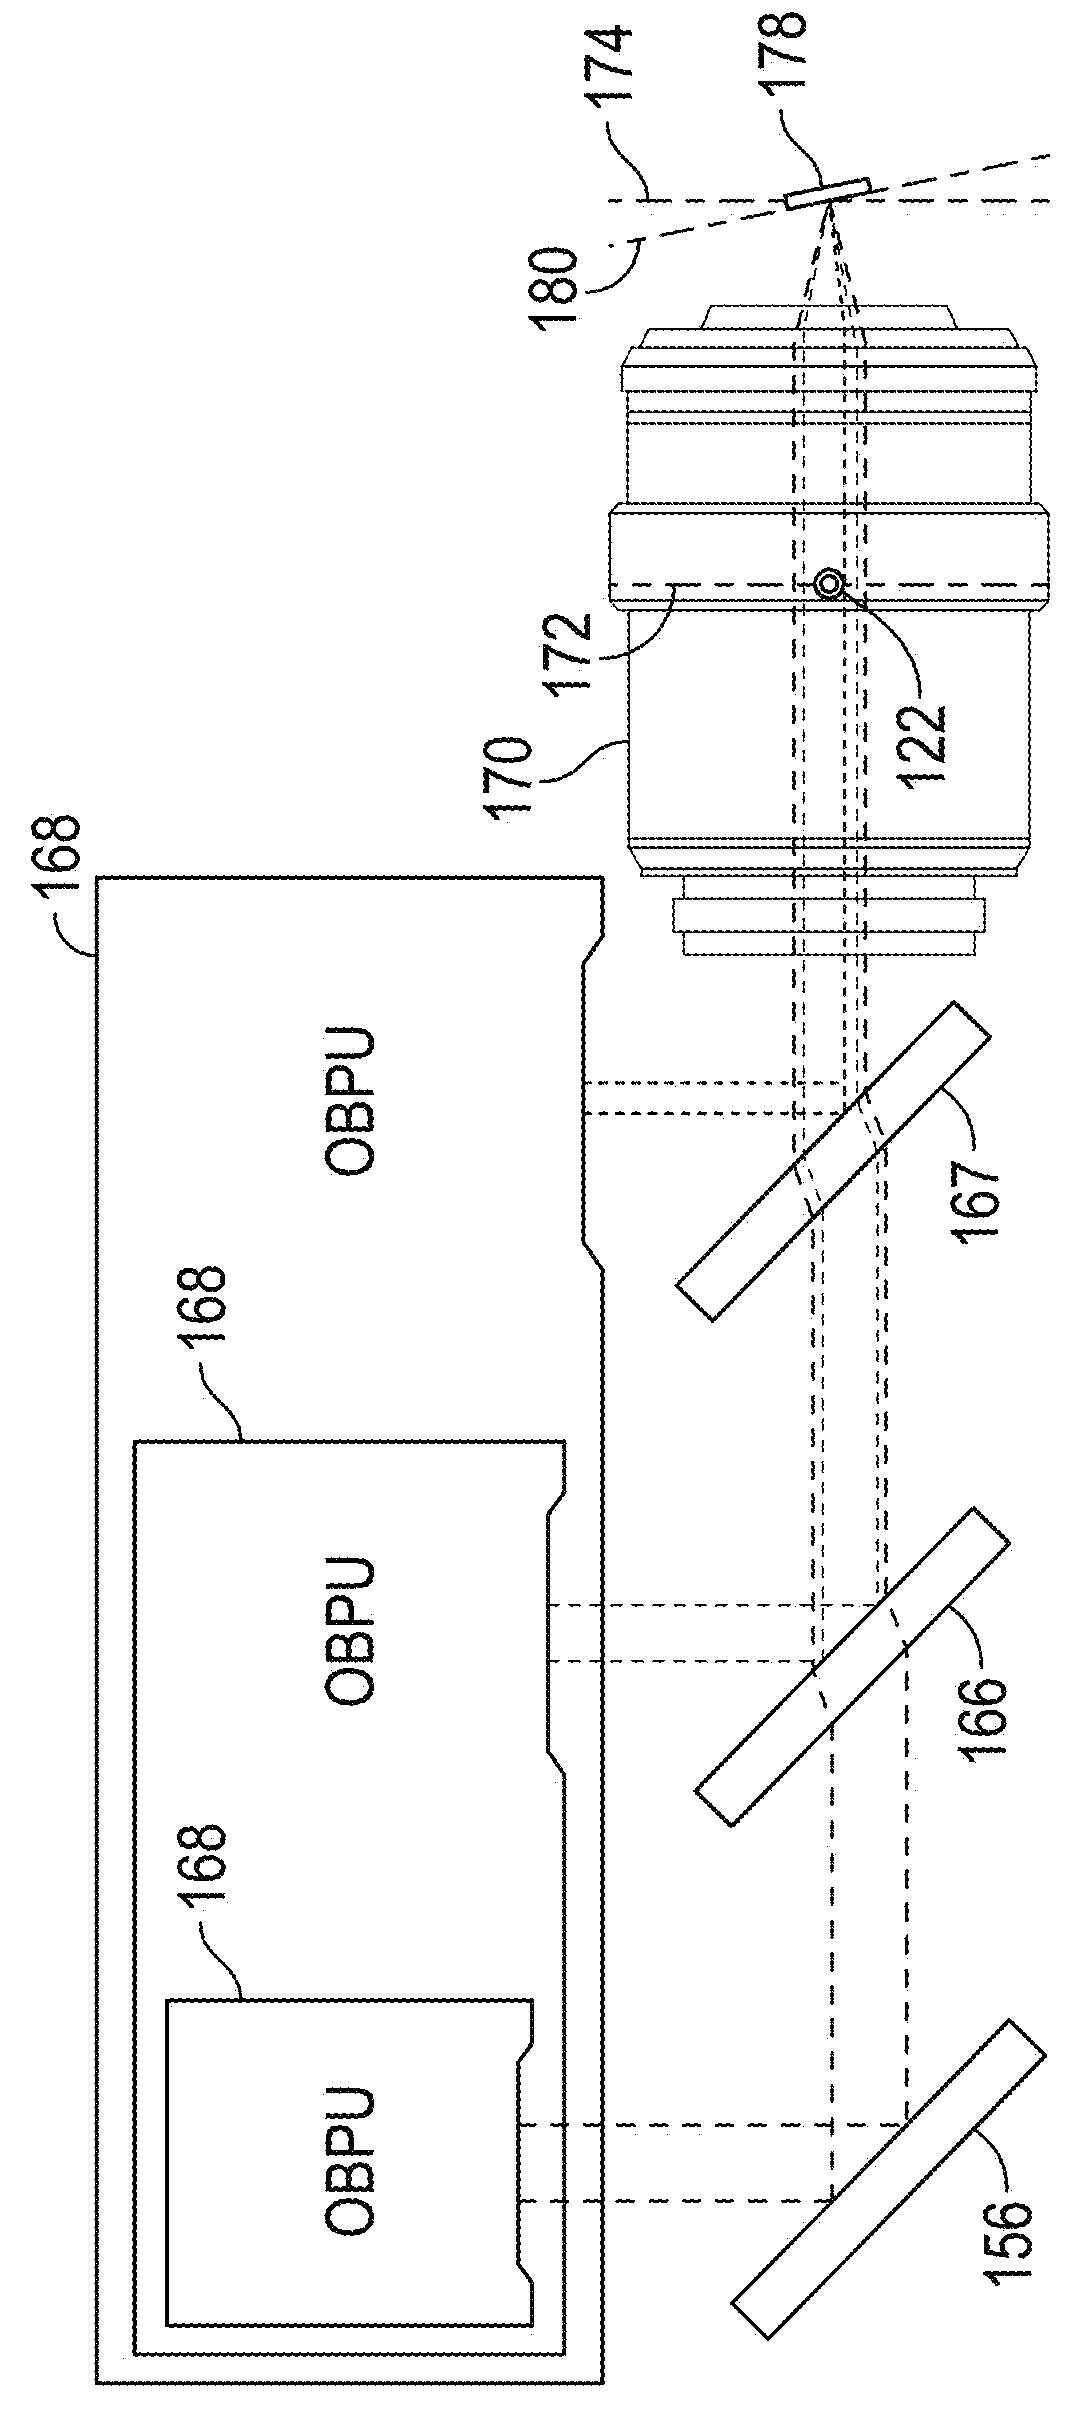 Optical beam positioning unit for atomic force microscope